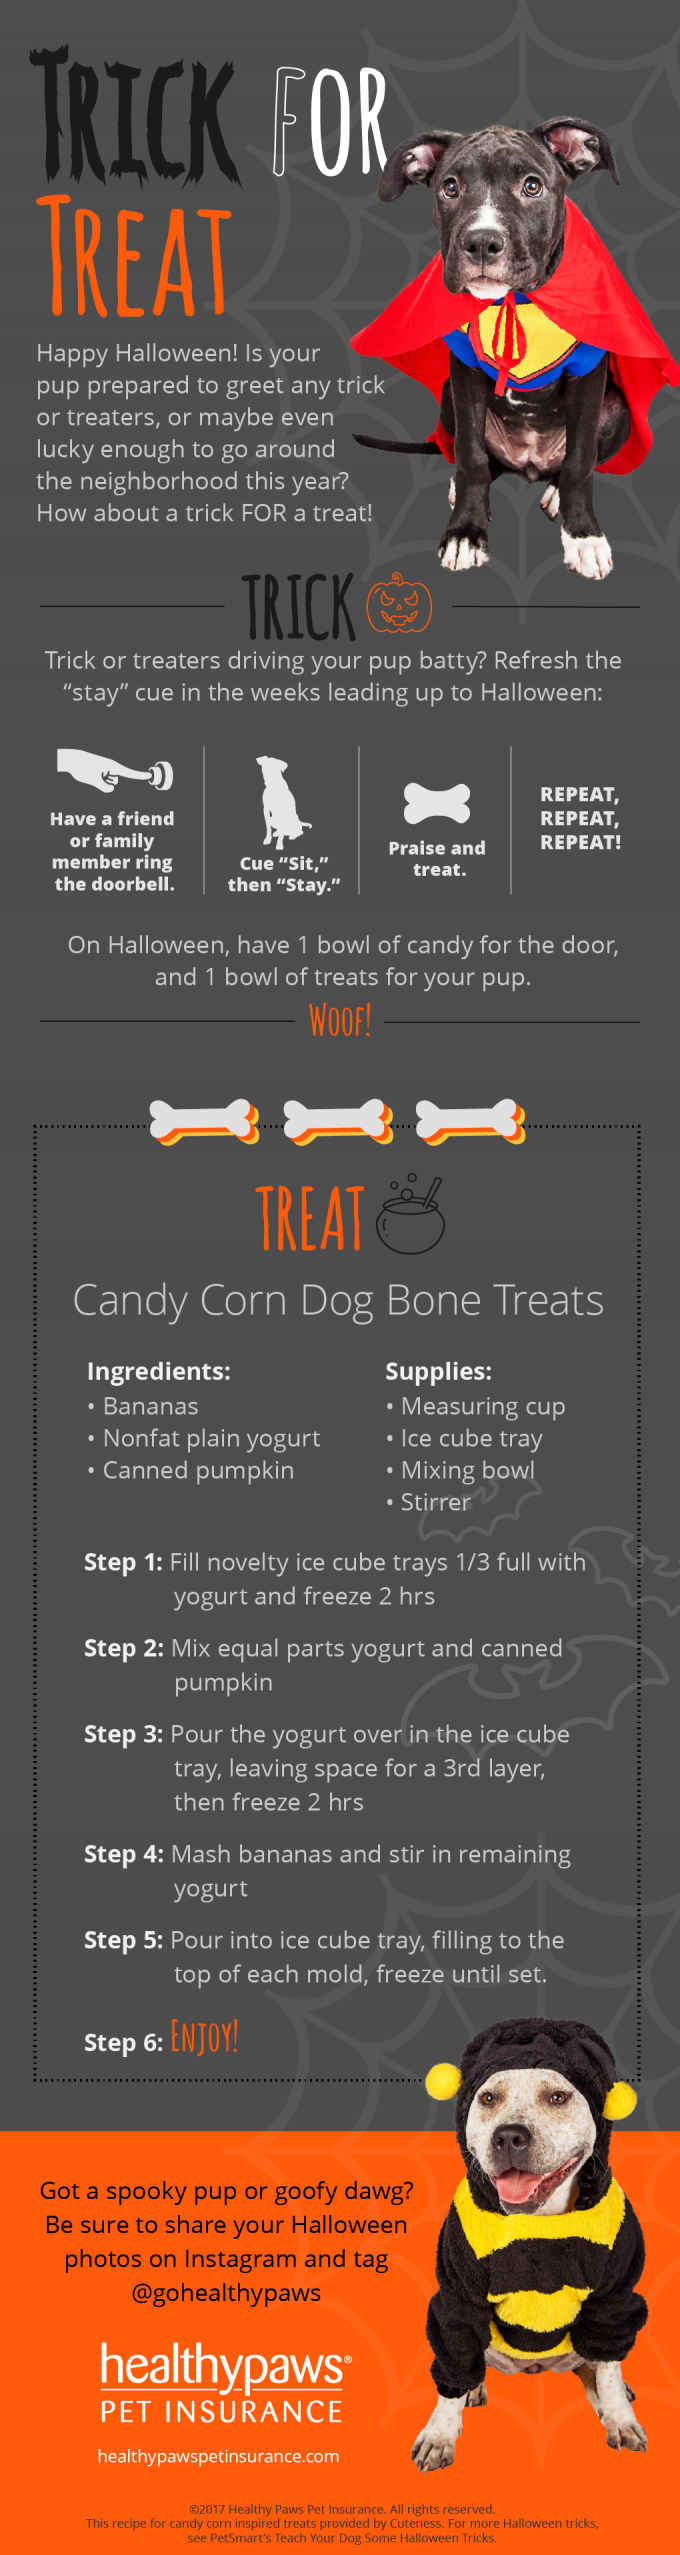 healthy paws halloween